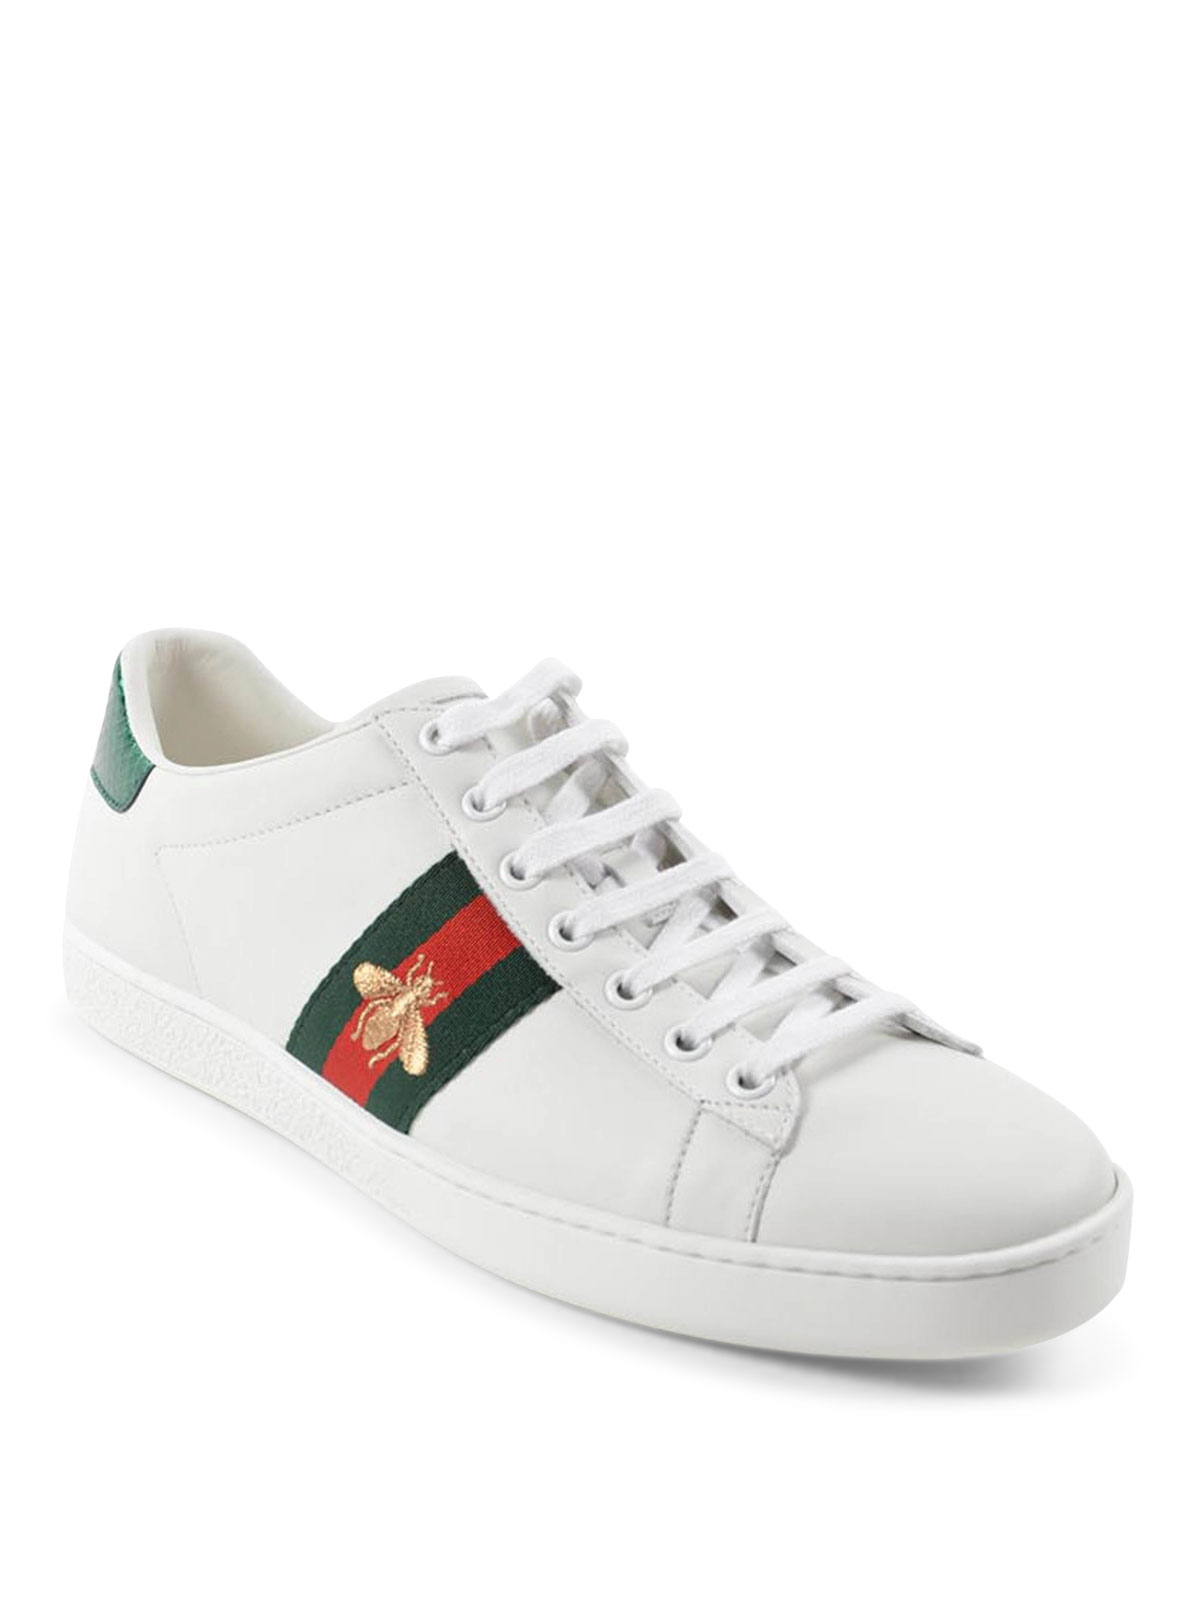 Embroidered bee leather sneakers by Gucci - trainers | iKRIX